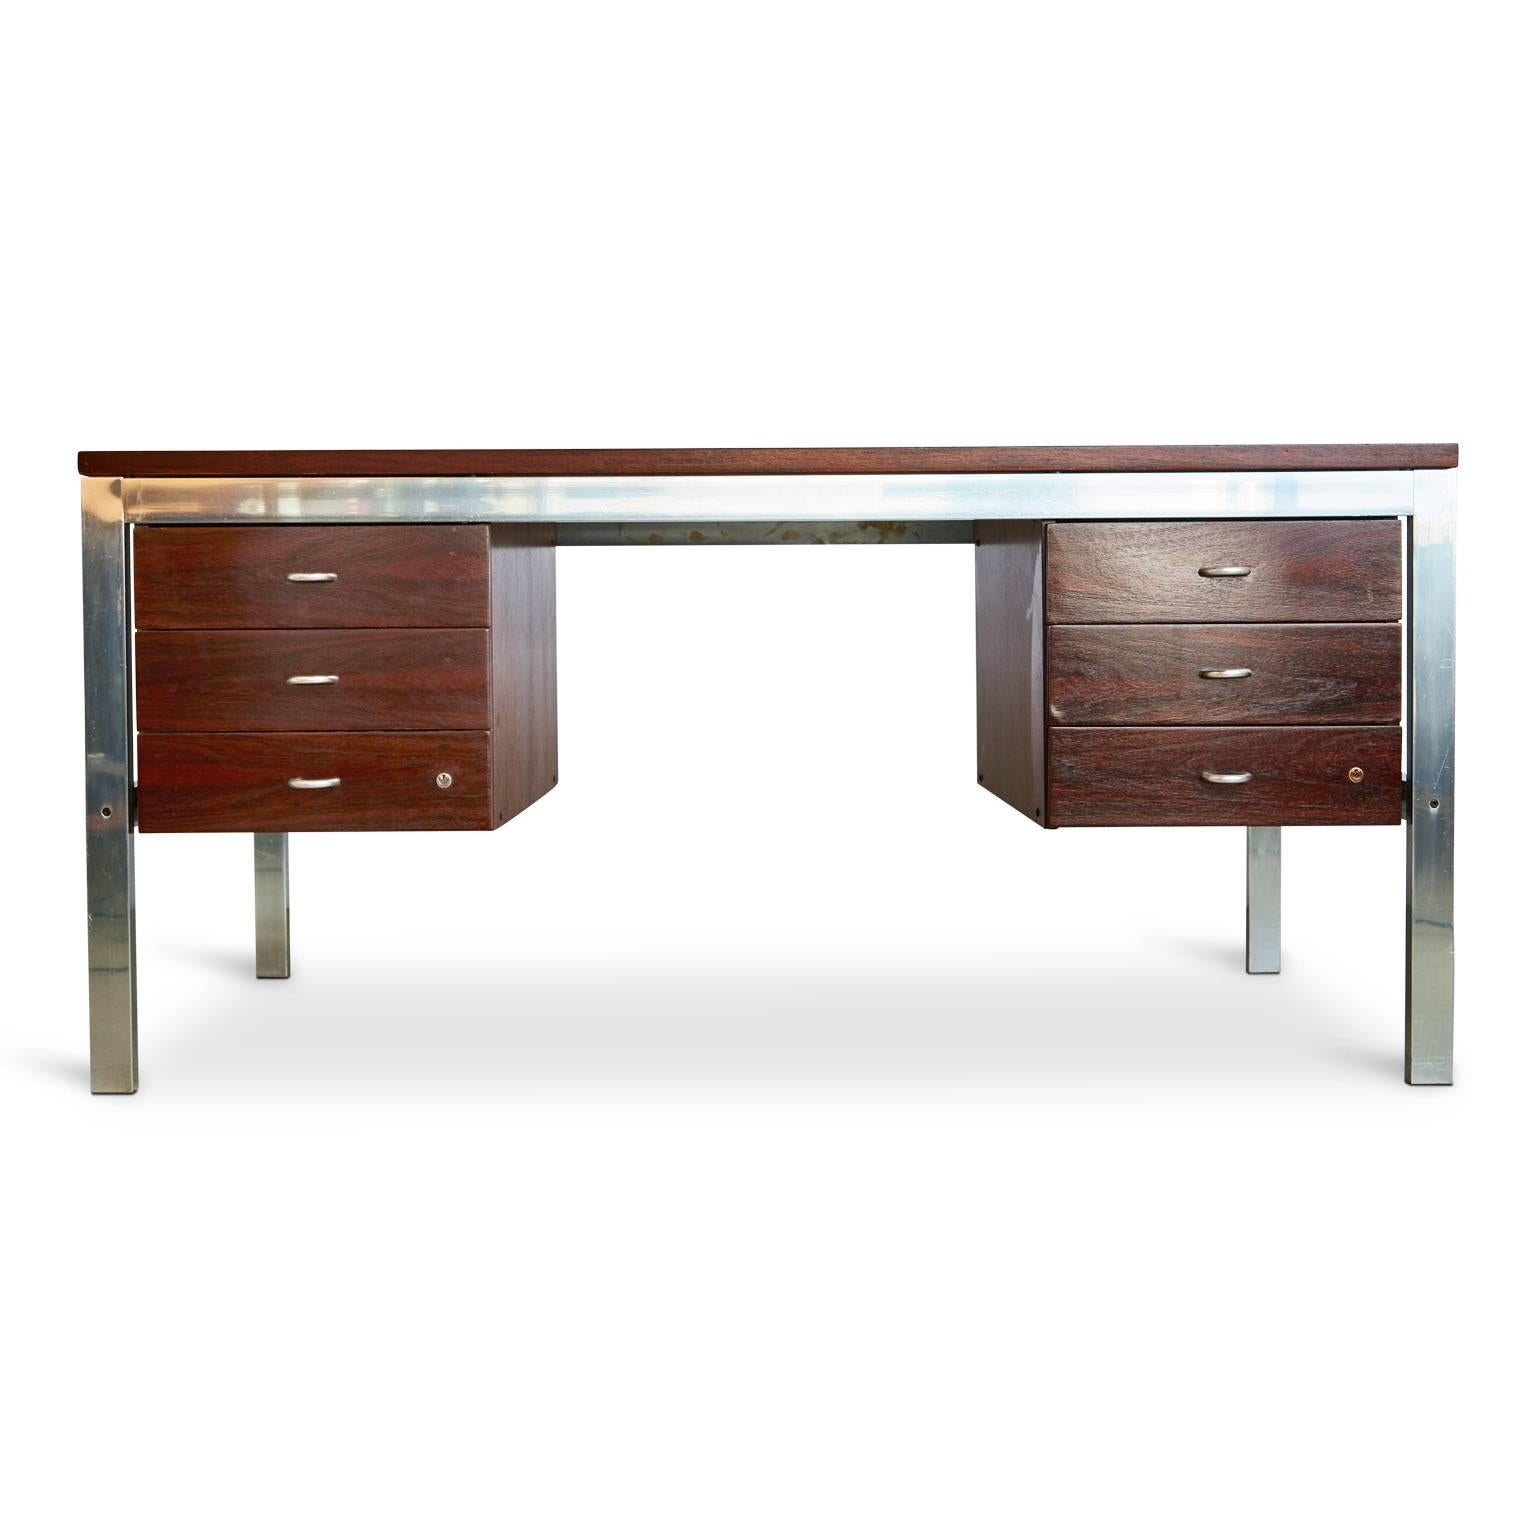 Brazilian rosewood desk with aluminum frame by Tora Brazil. Featuring double pedestals consisting of two (2) sets of three (3) drawers with half-circle chrome pulls and the original label on one end with the word 